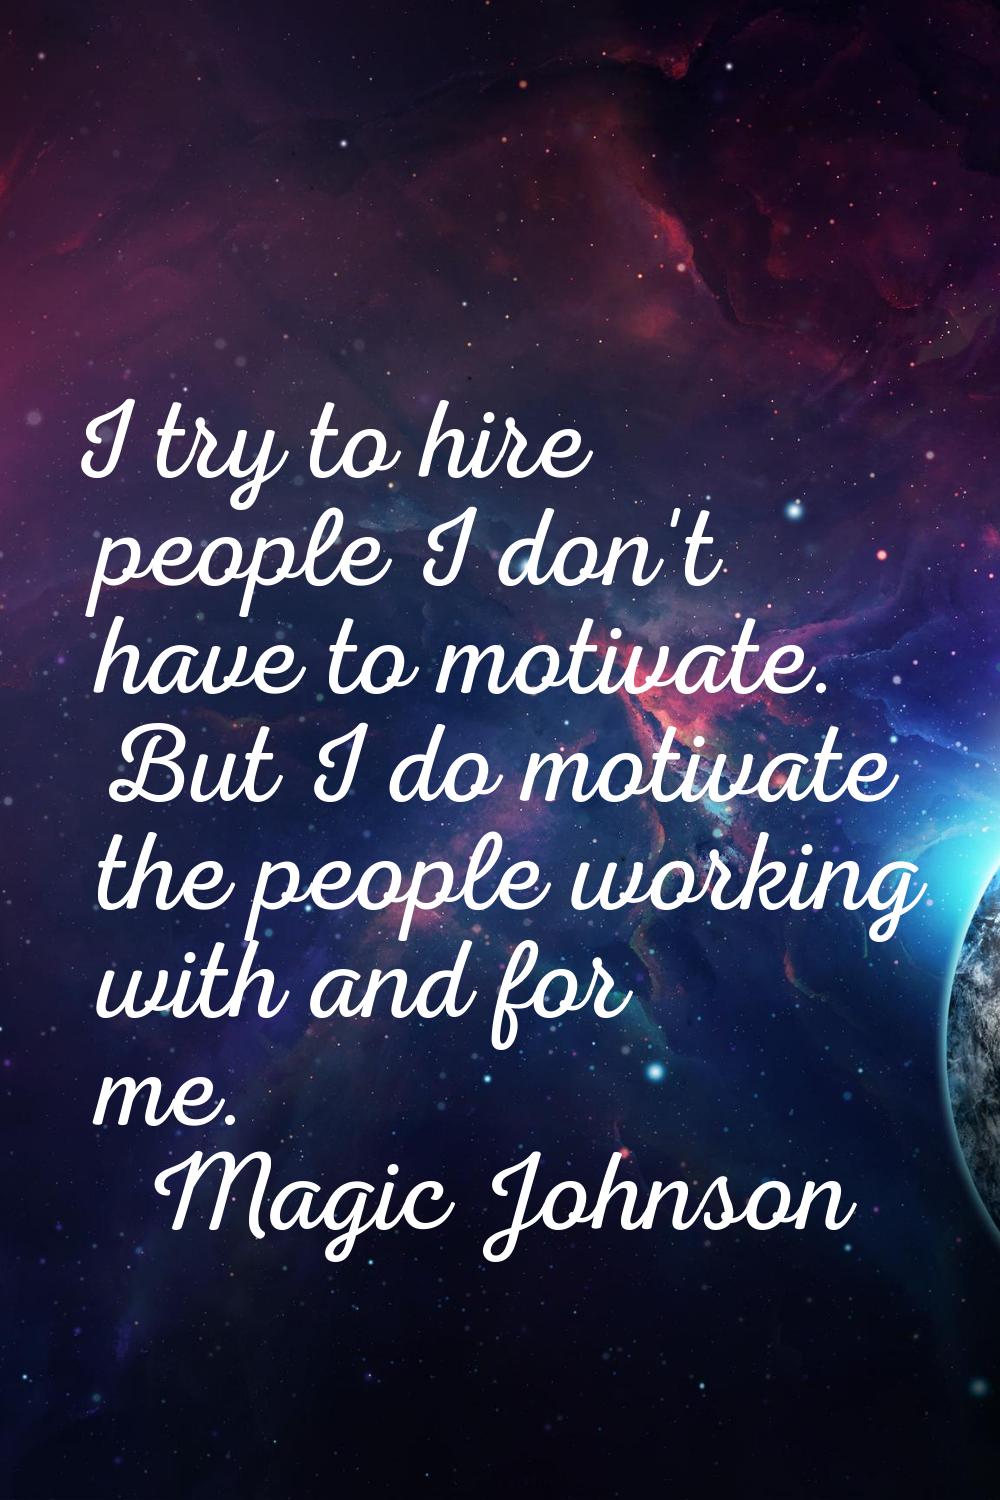 I try to hire people I don't have to motivate. But I do motivate the people working with and for me